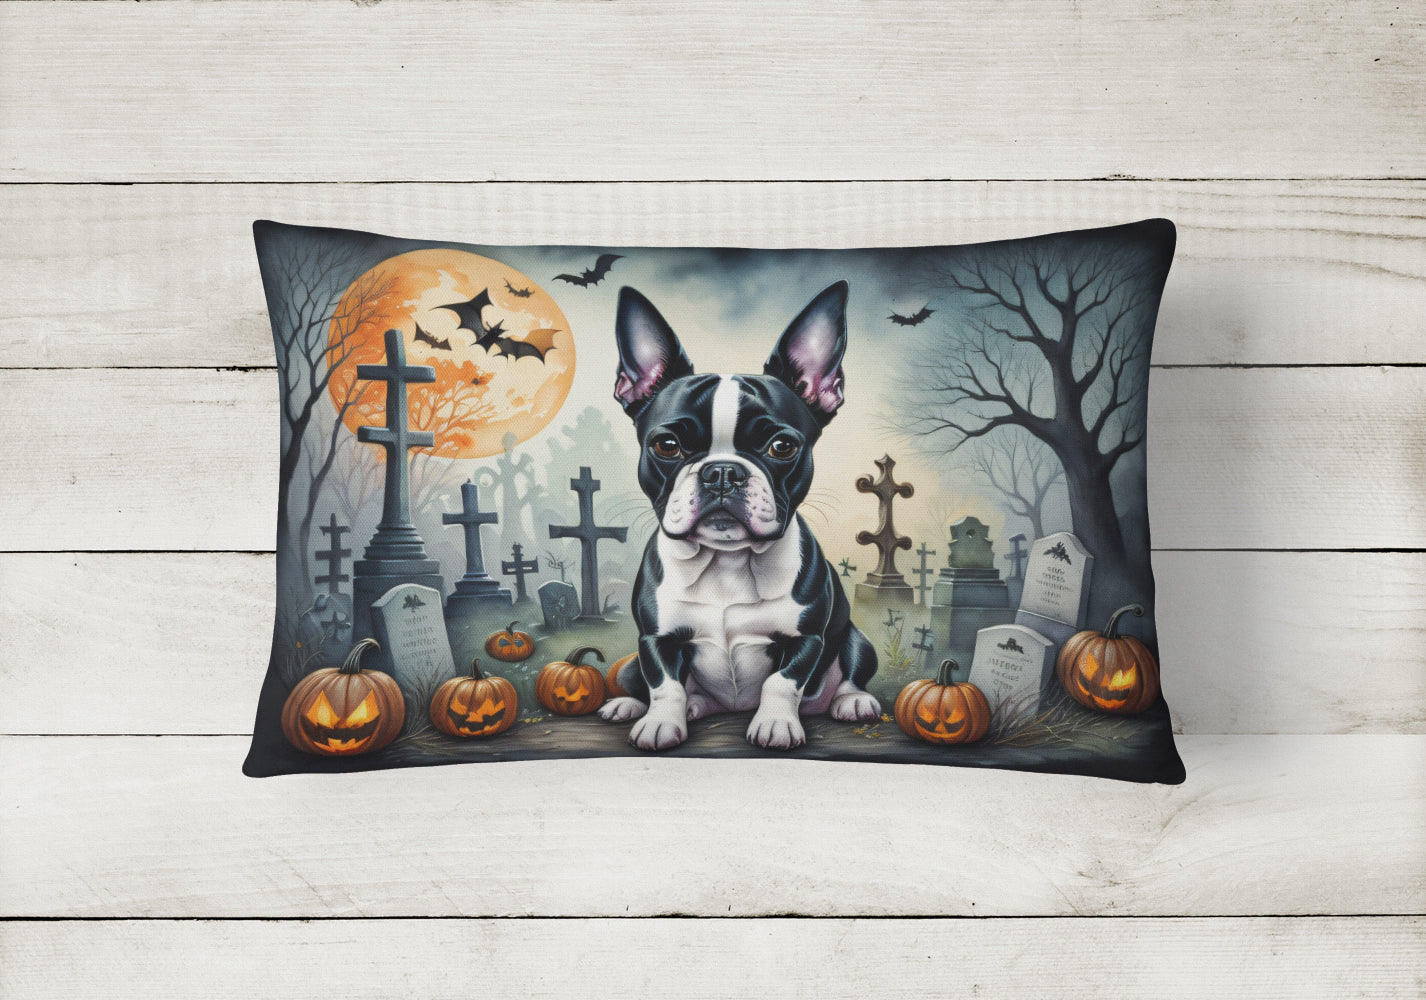 Buy this Boston Terrier Spooky Halloween Fabric Decorative Pillow